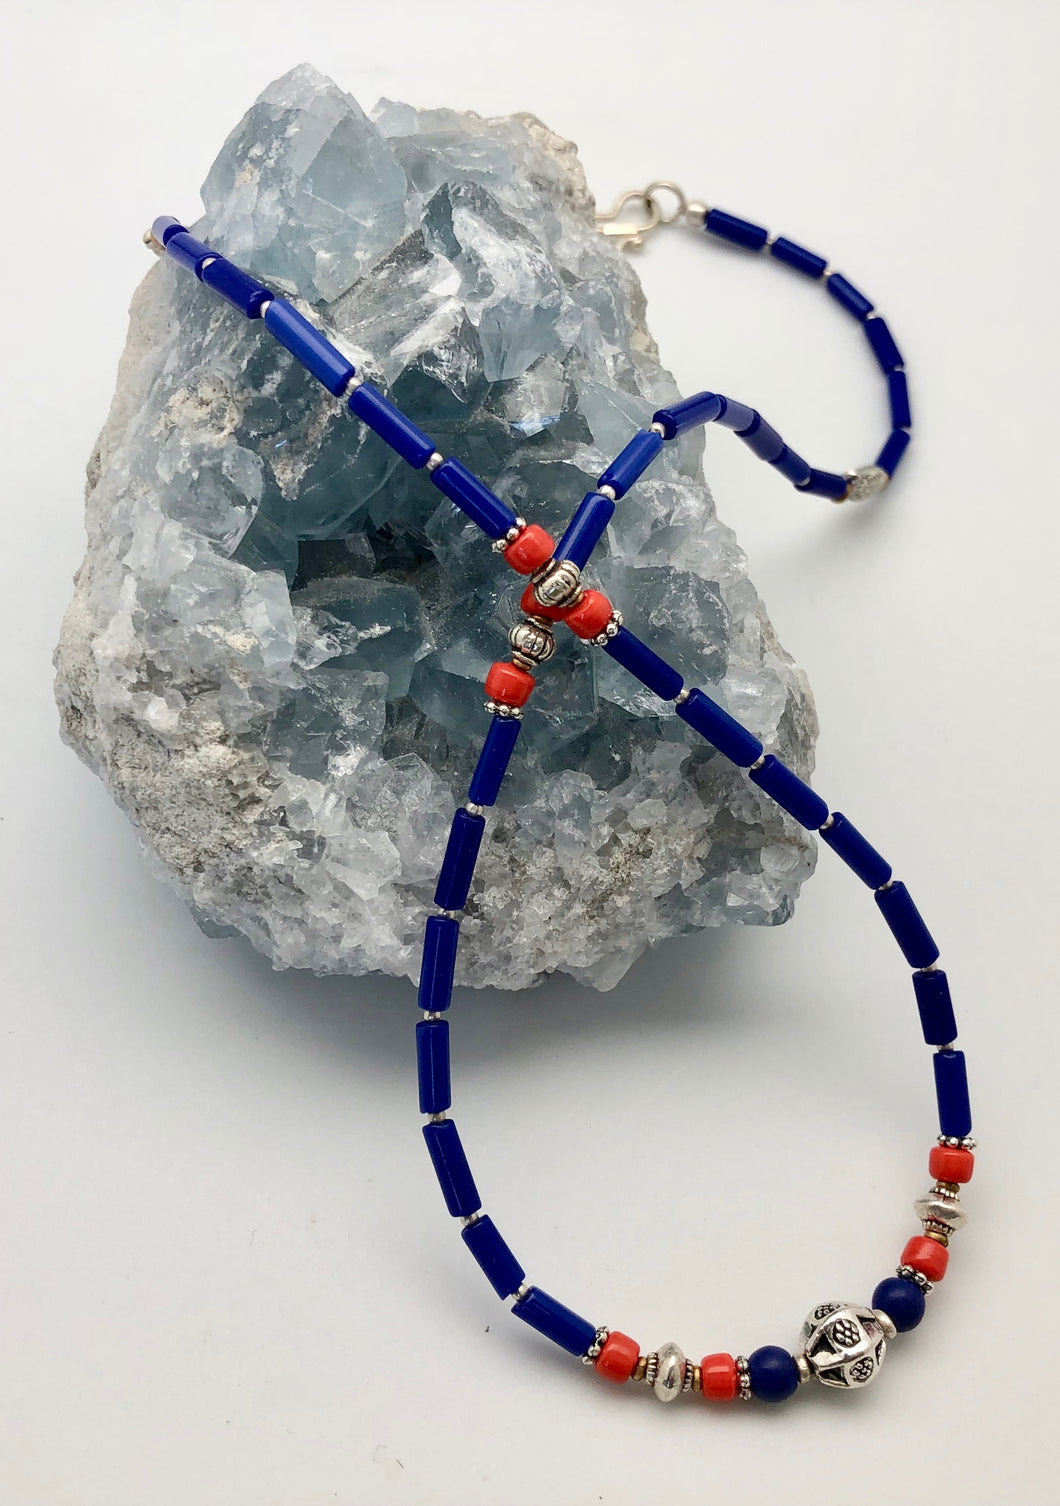 Nepali Blue Serenity Lapis & Coral Small Bead Necklace